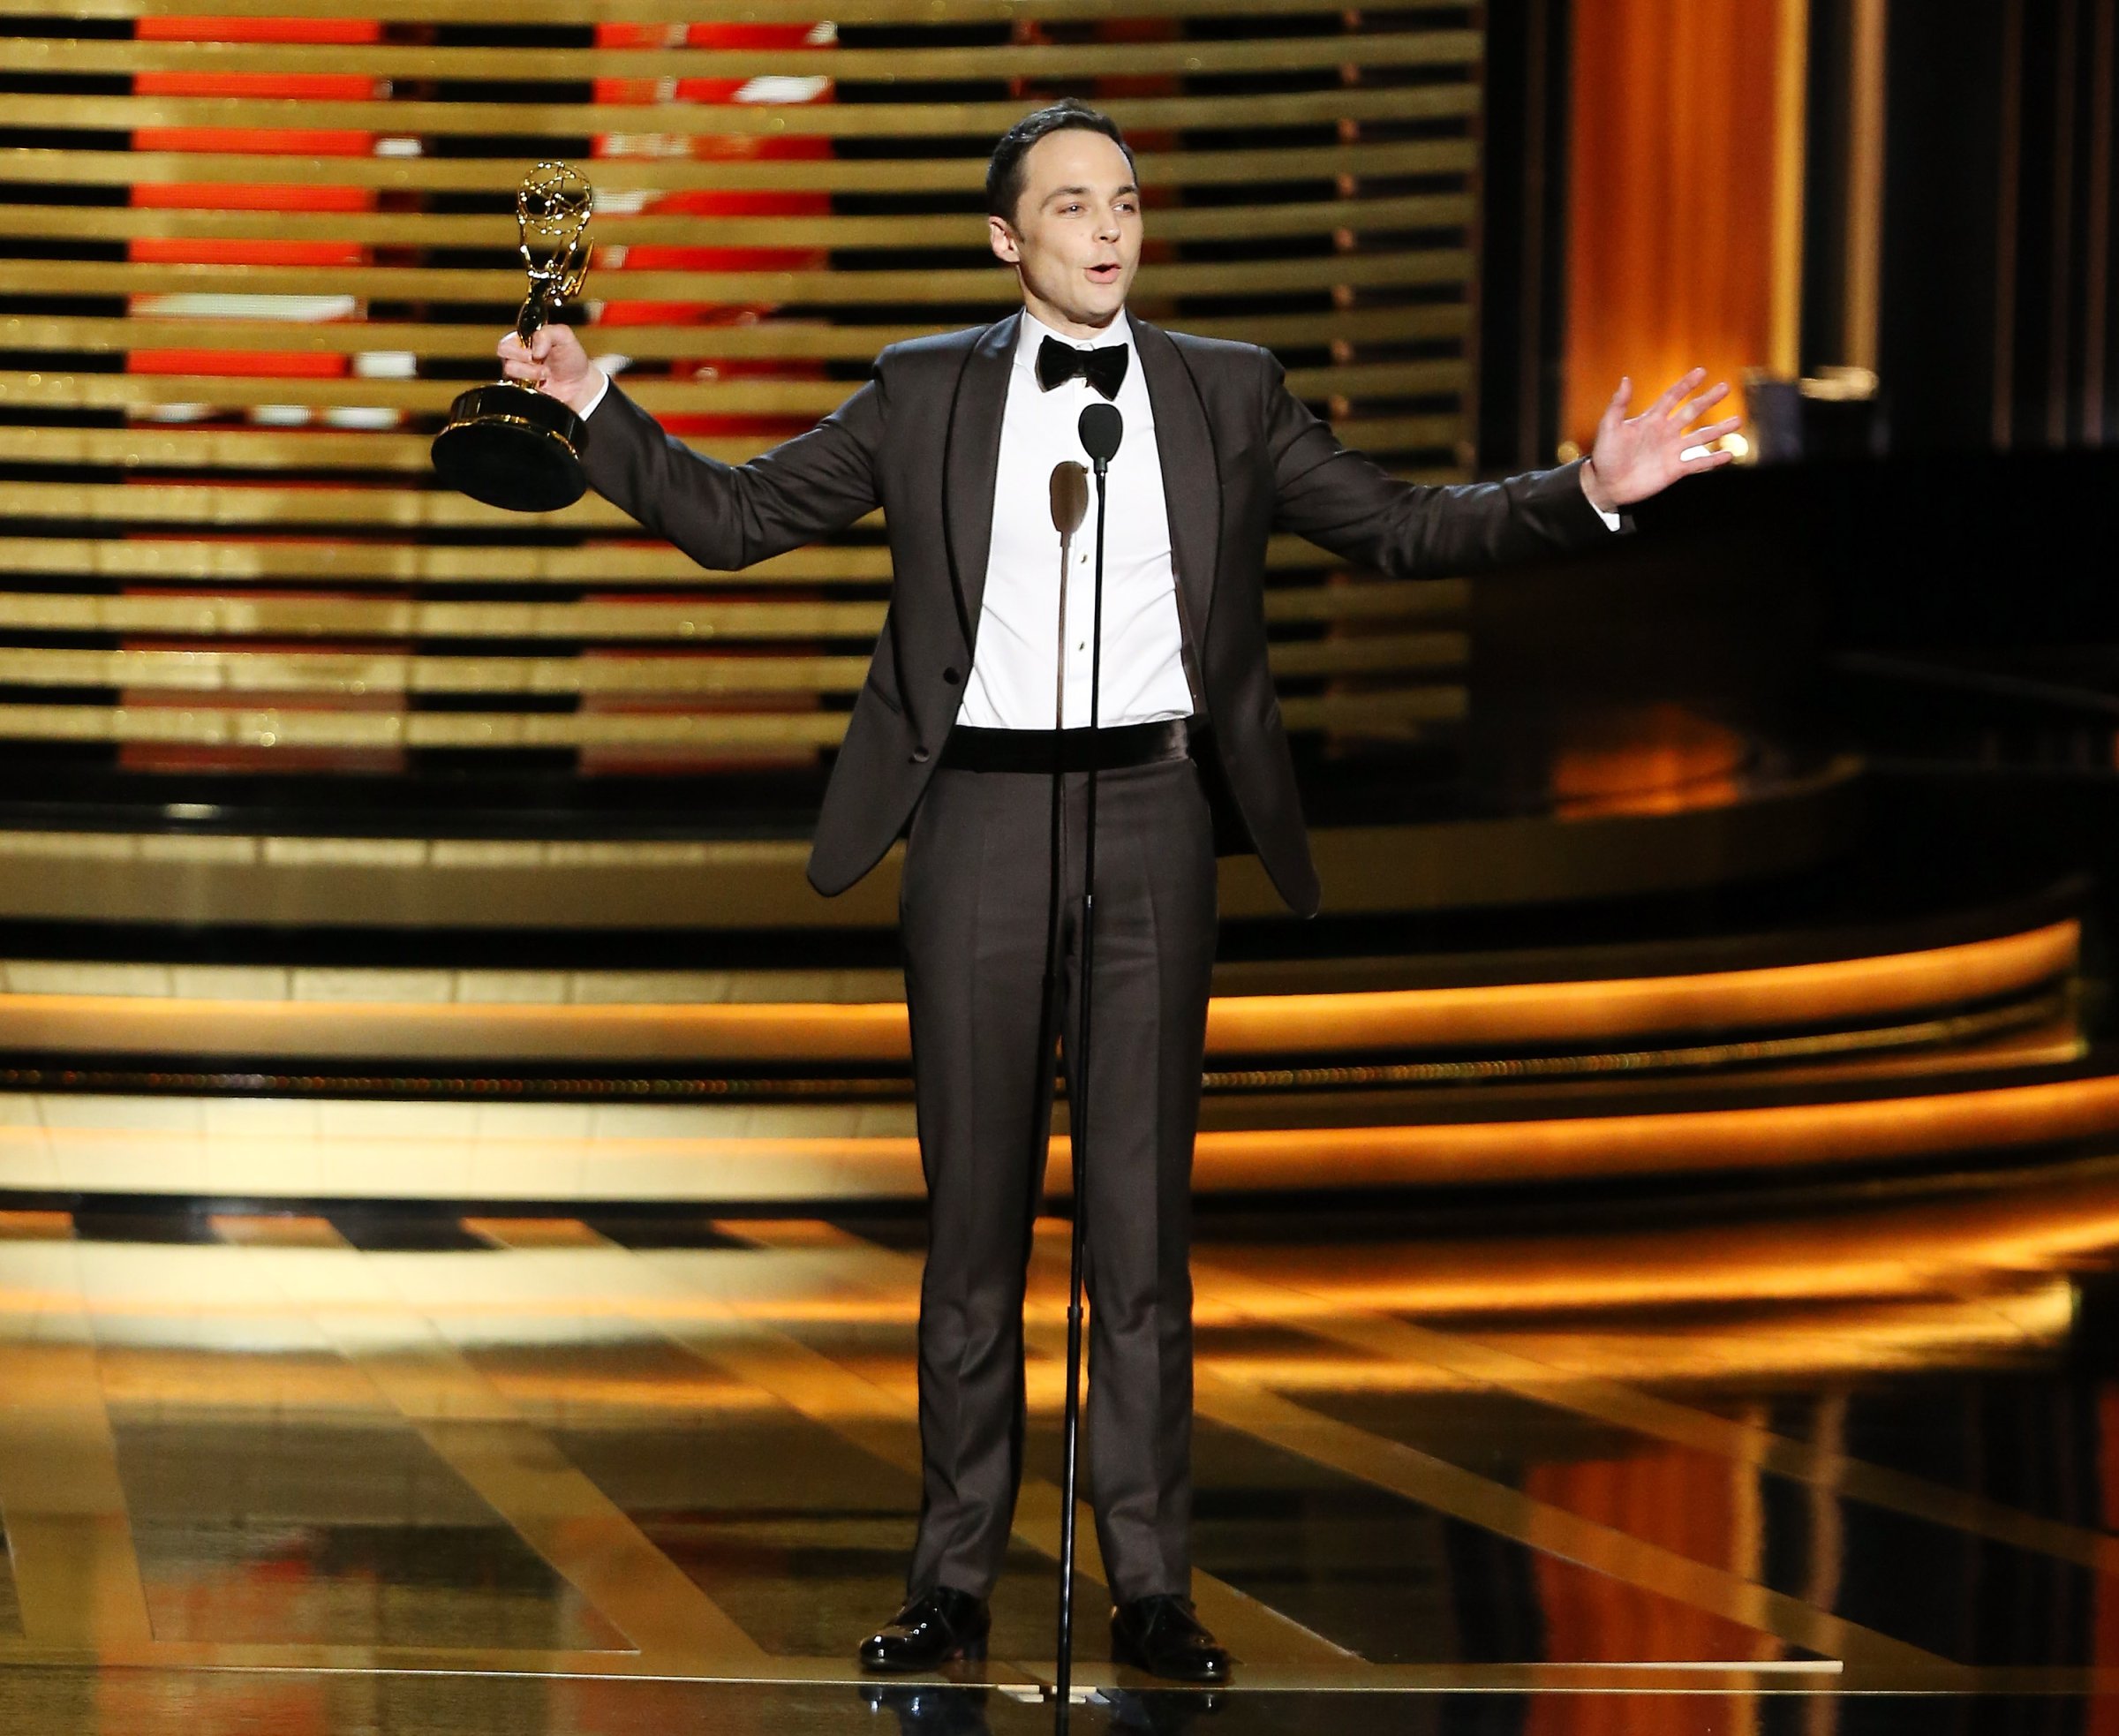 Jim Parsons accepts his trophy for Outstanding Lead Actor in a Comedy Series at the 66th Annual Primetime Emmy Awards